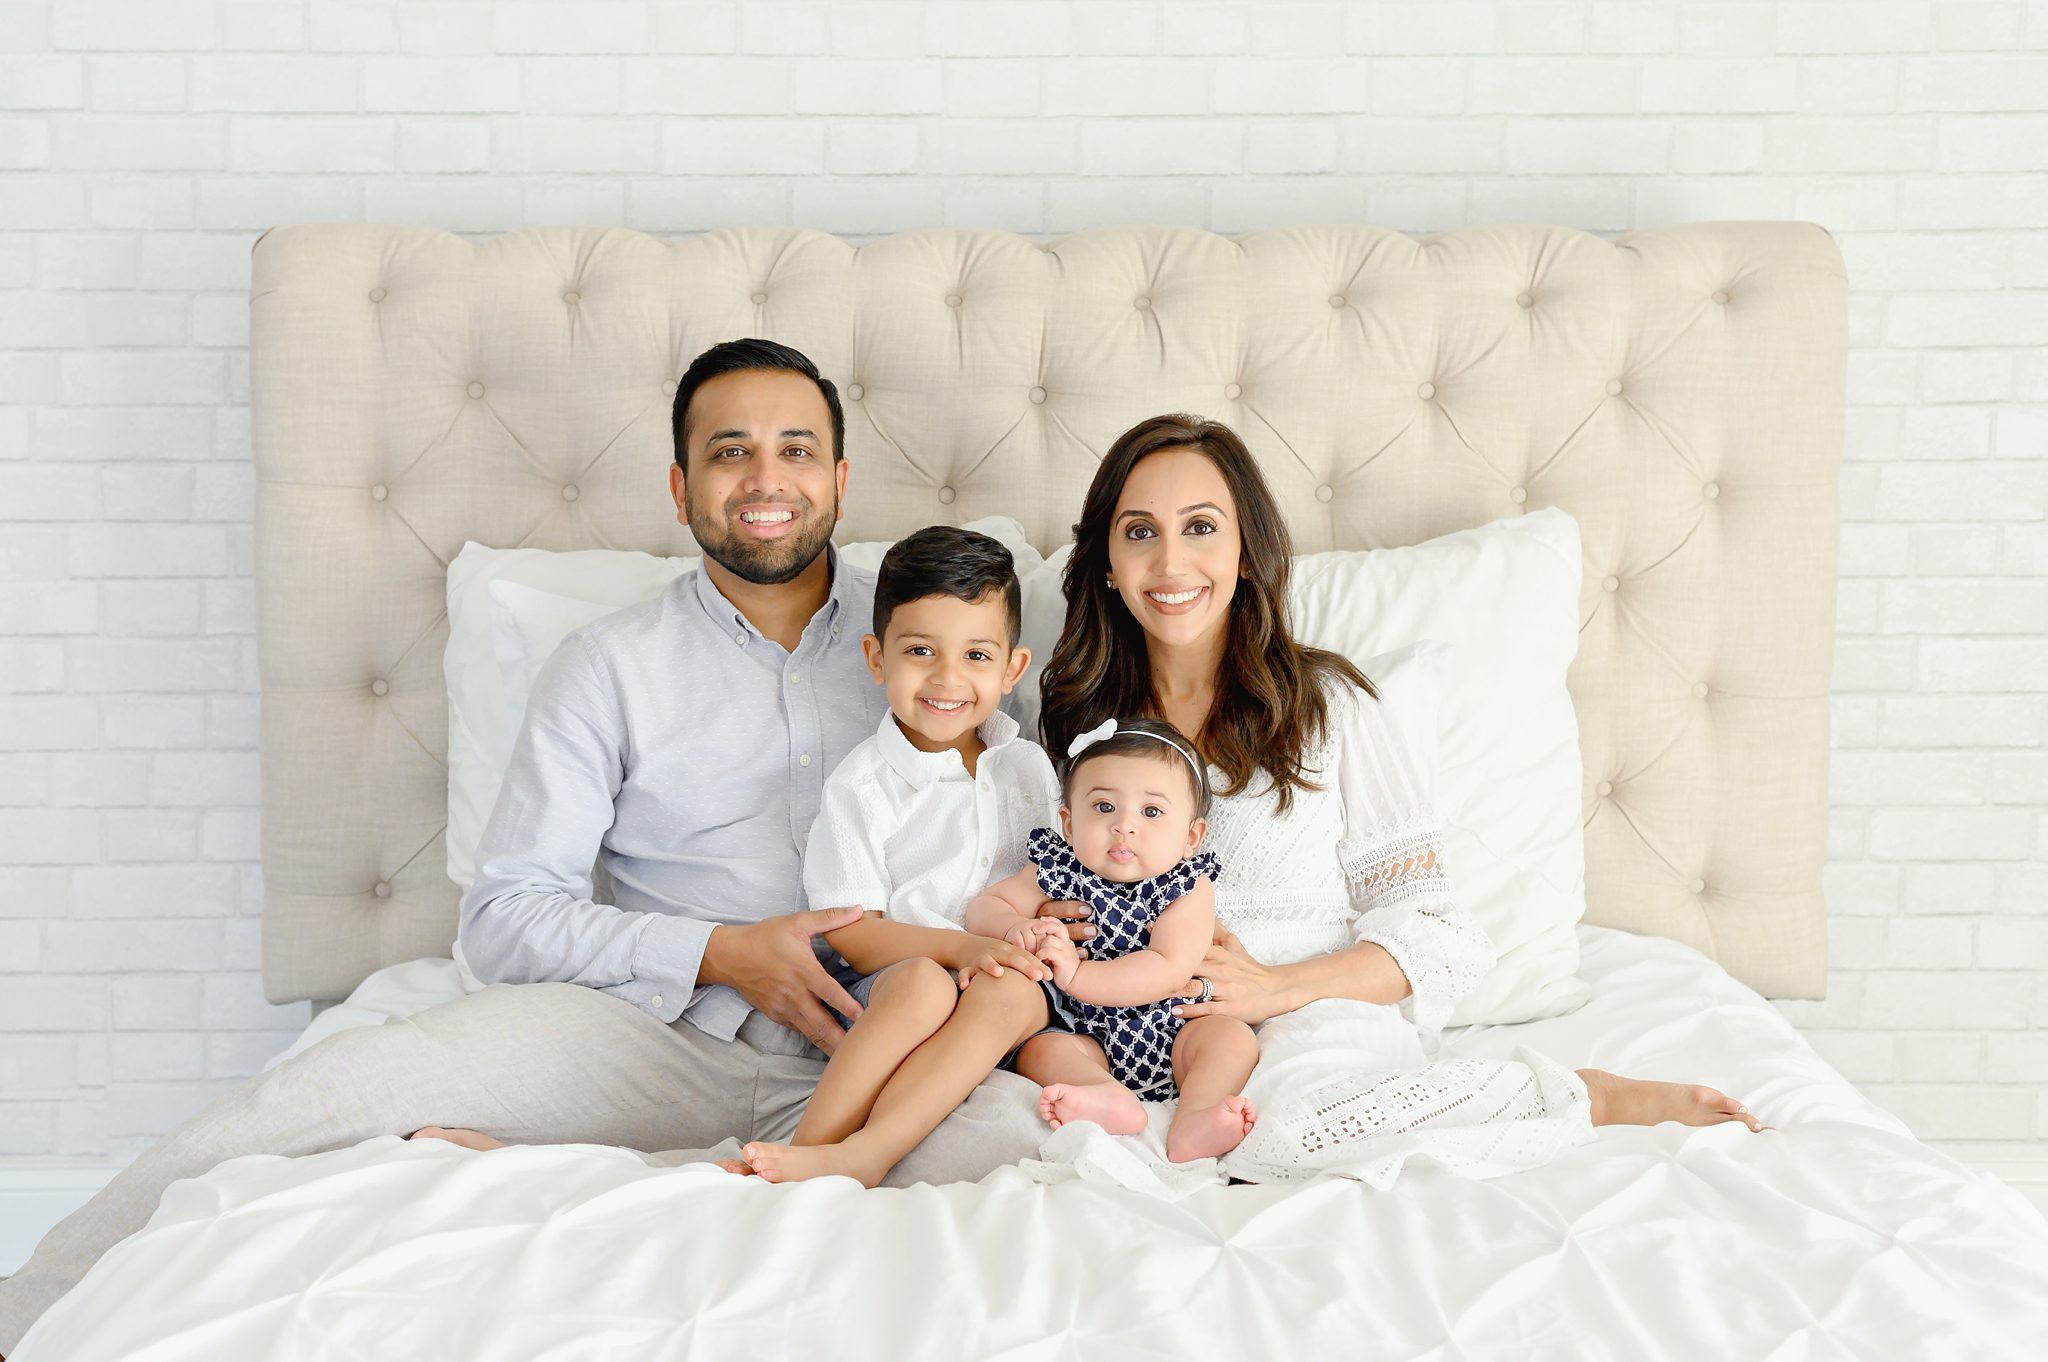 A family of 4 with a toddler boy and baby girl getting portraits done in a bright white studio.